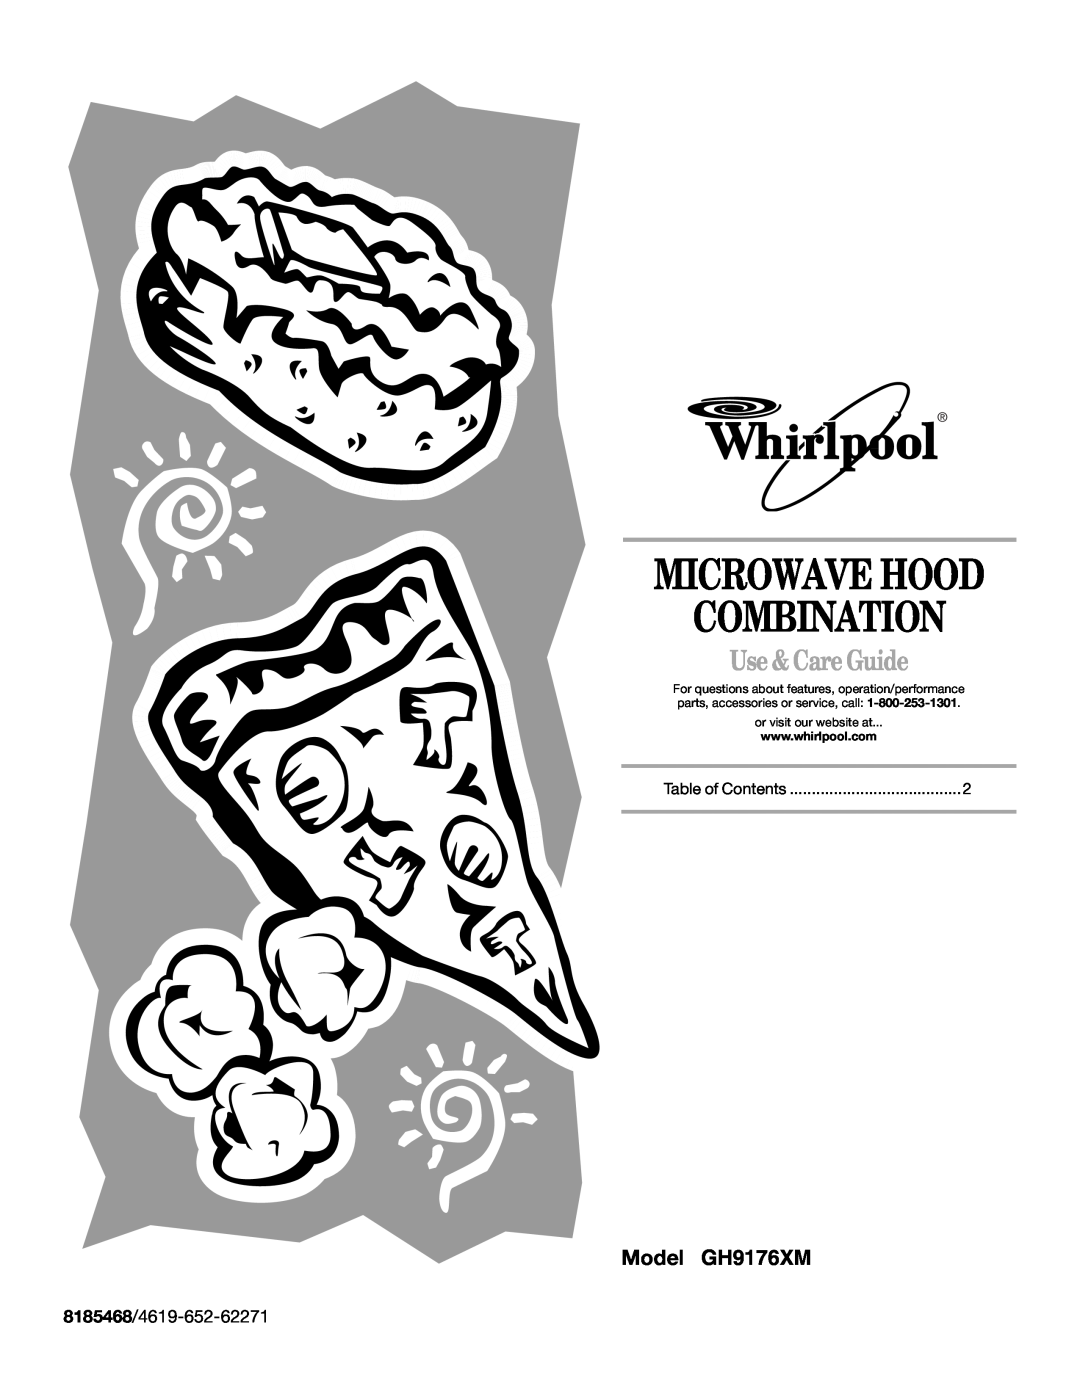 Whirlpool manual Microwave Hood Combination, Use & Care Guide, Model GH9176XM, 8185468/4619-652-62271 